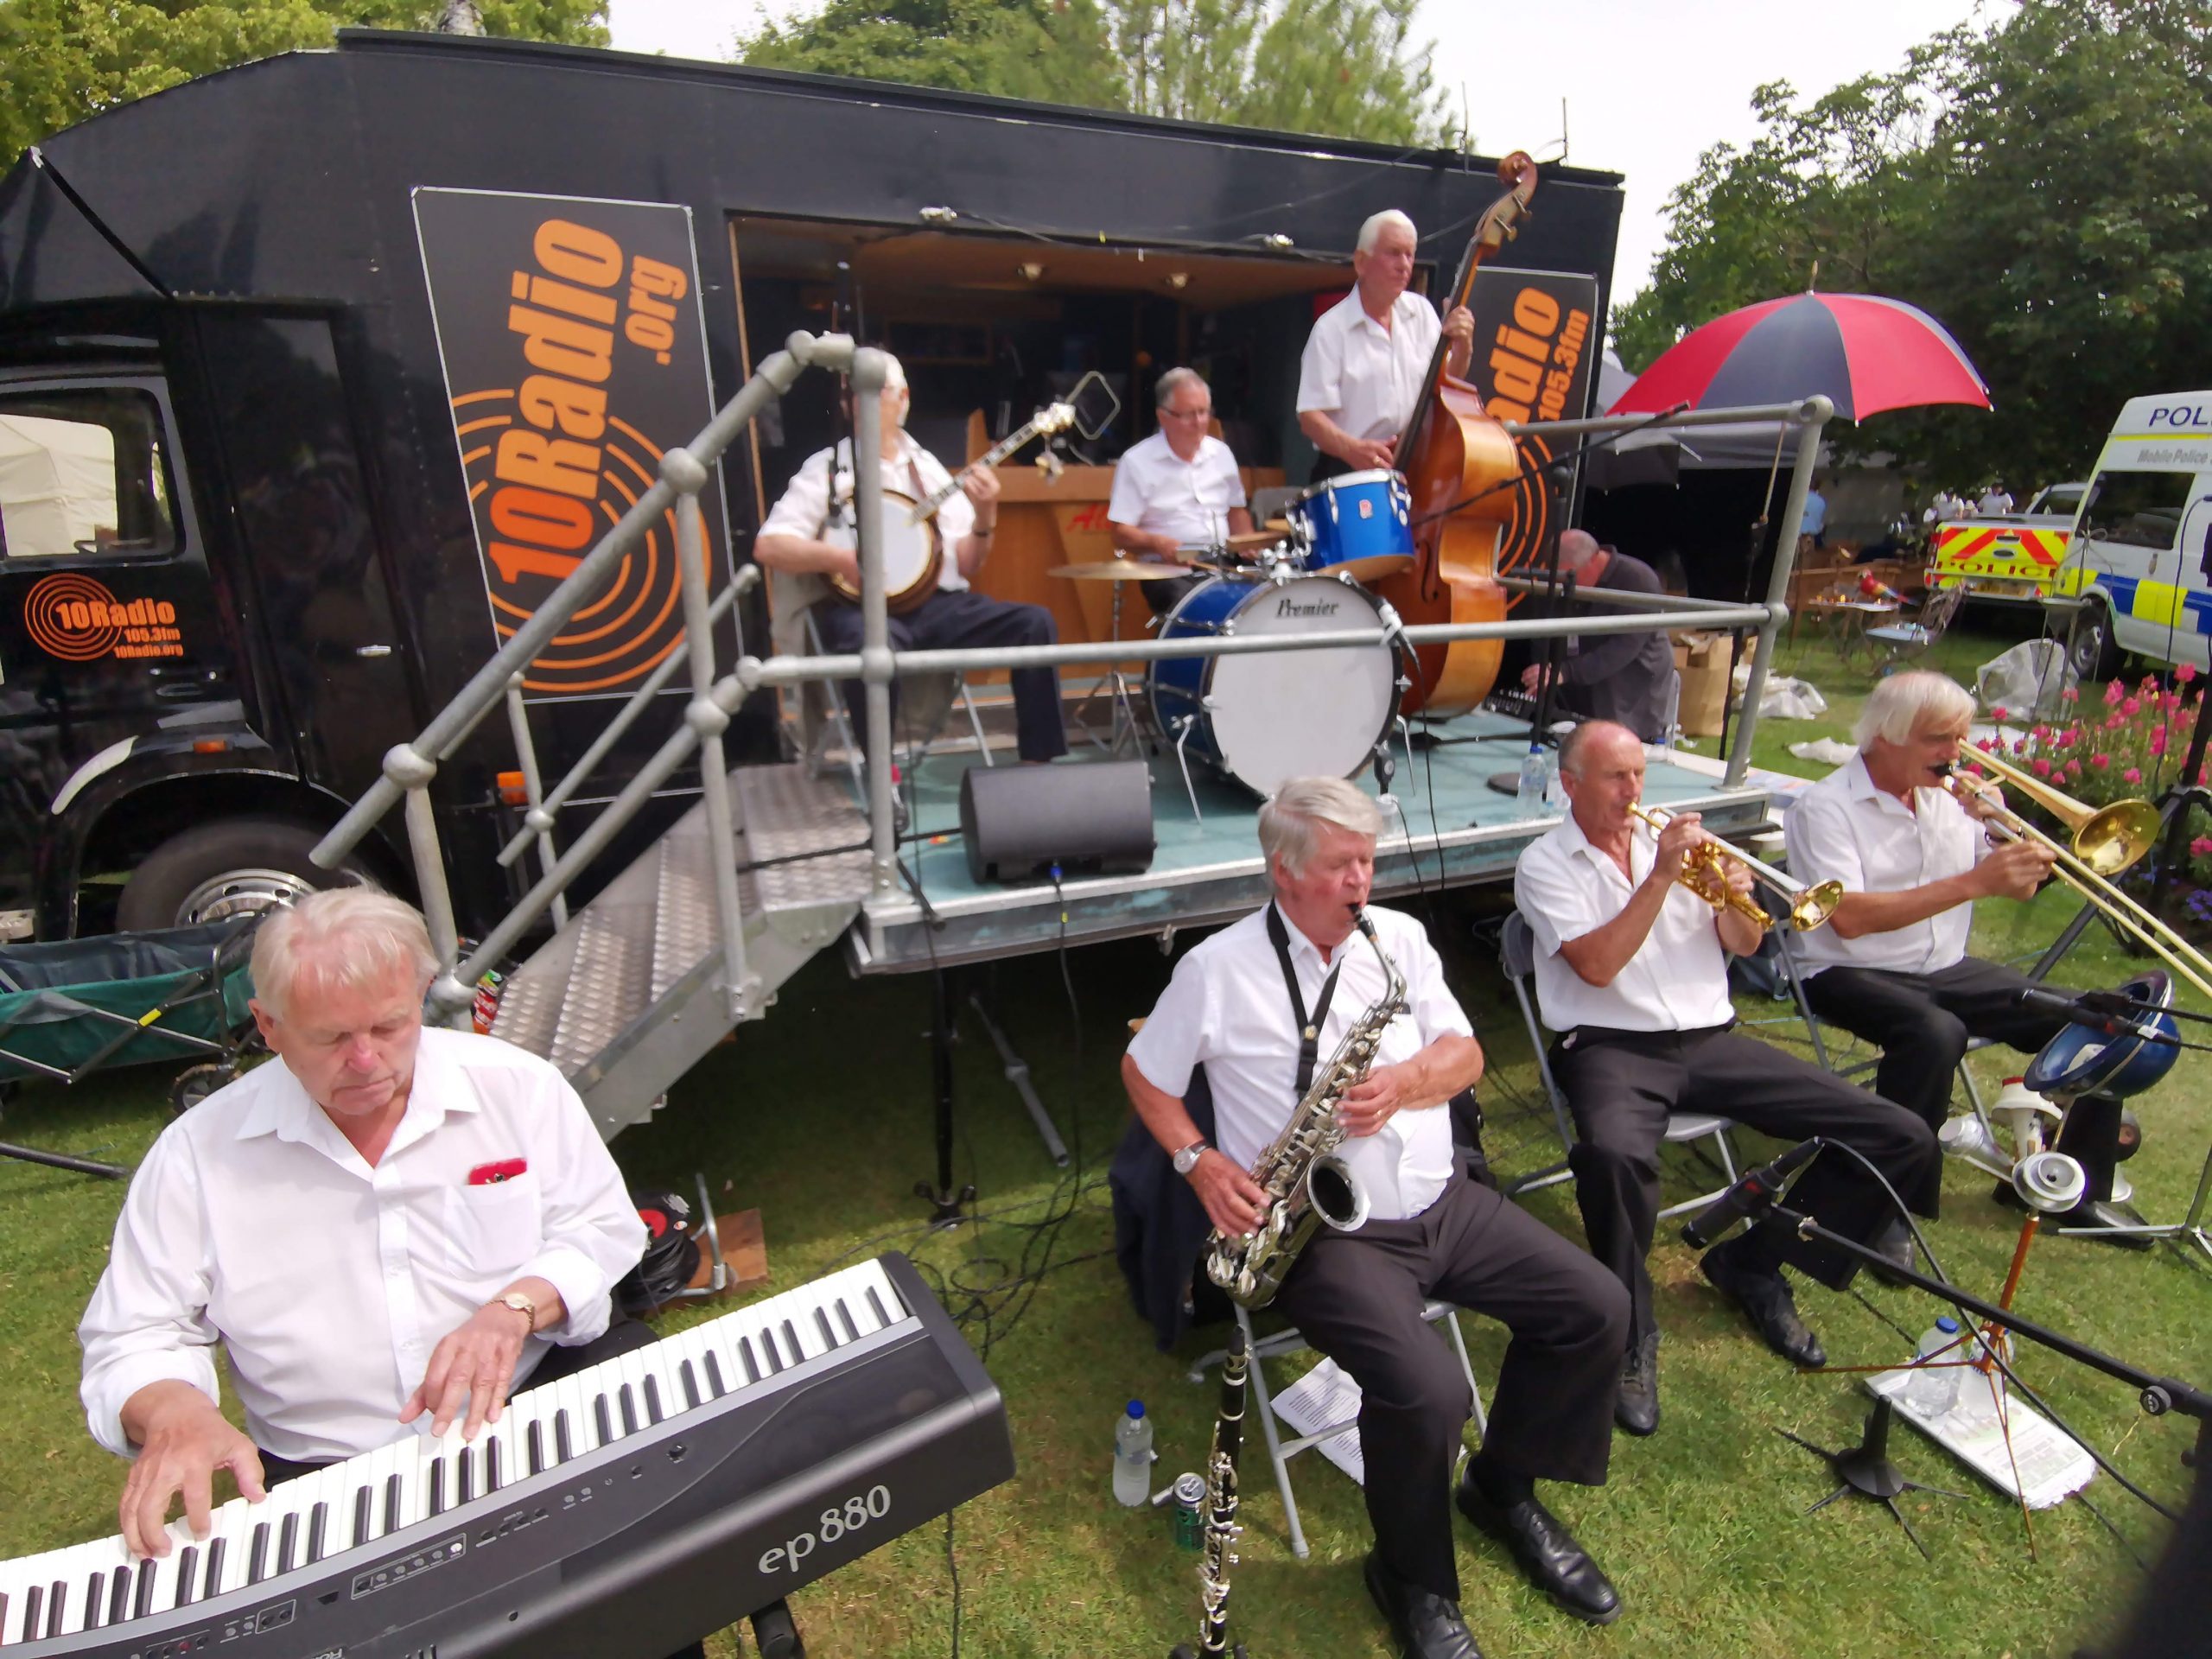 Band playing at the 10Radio stage in Fountain Green